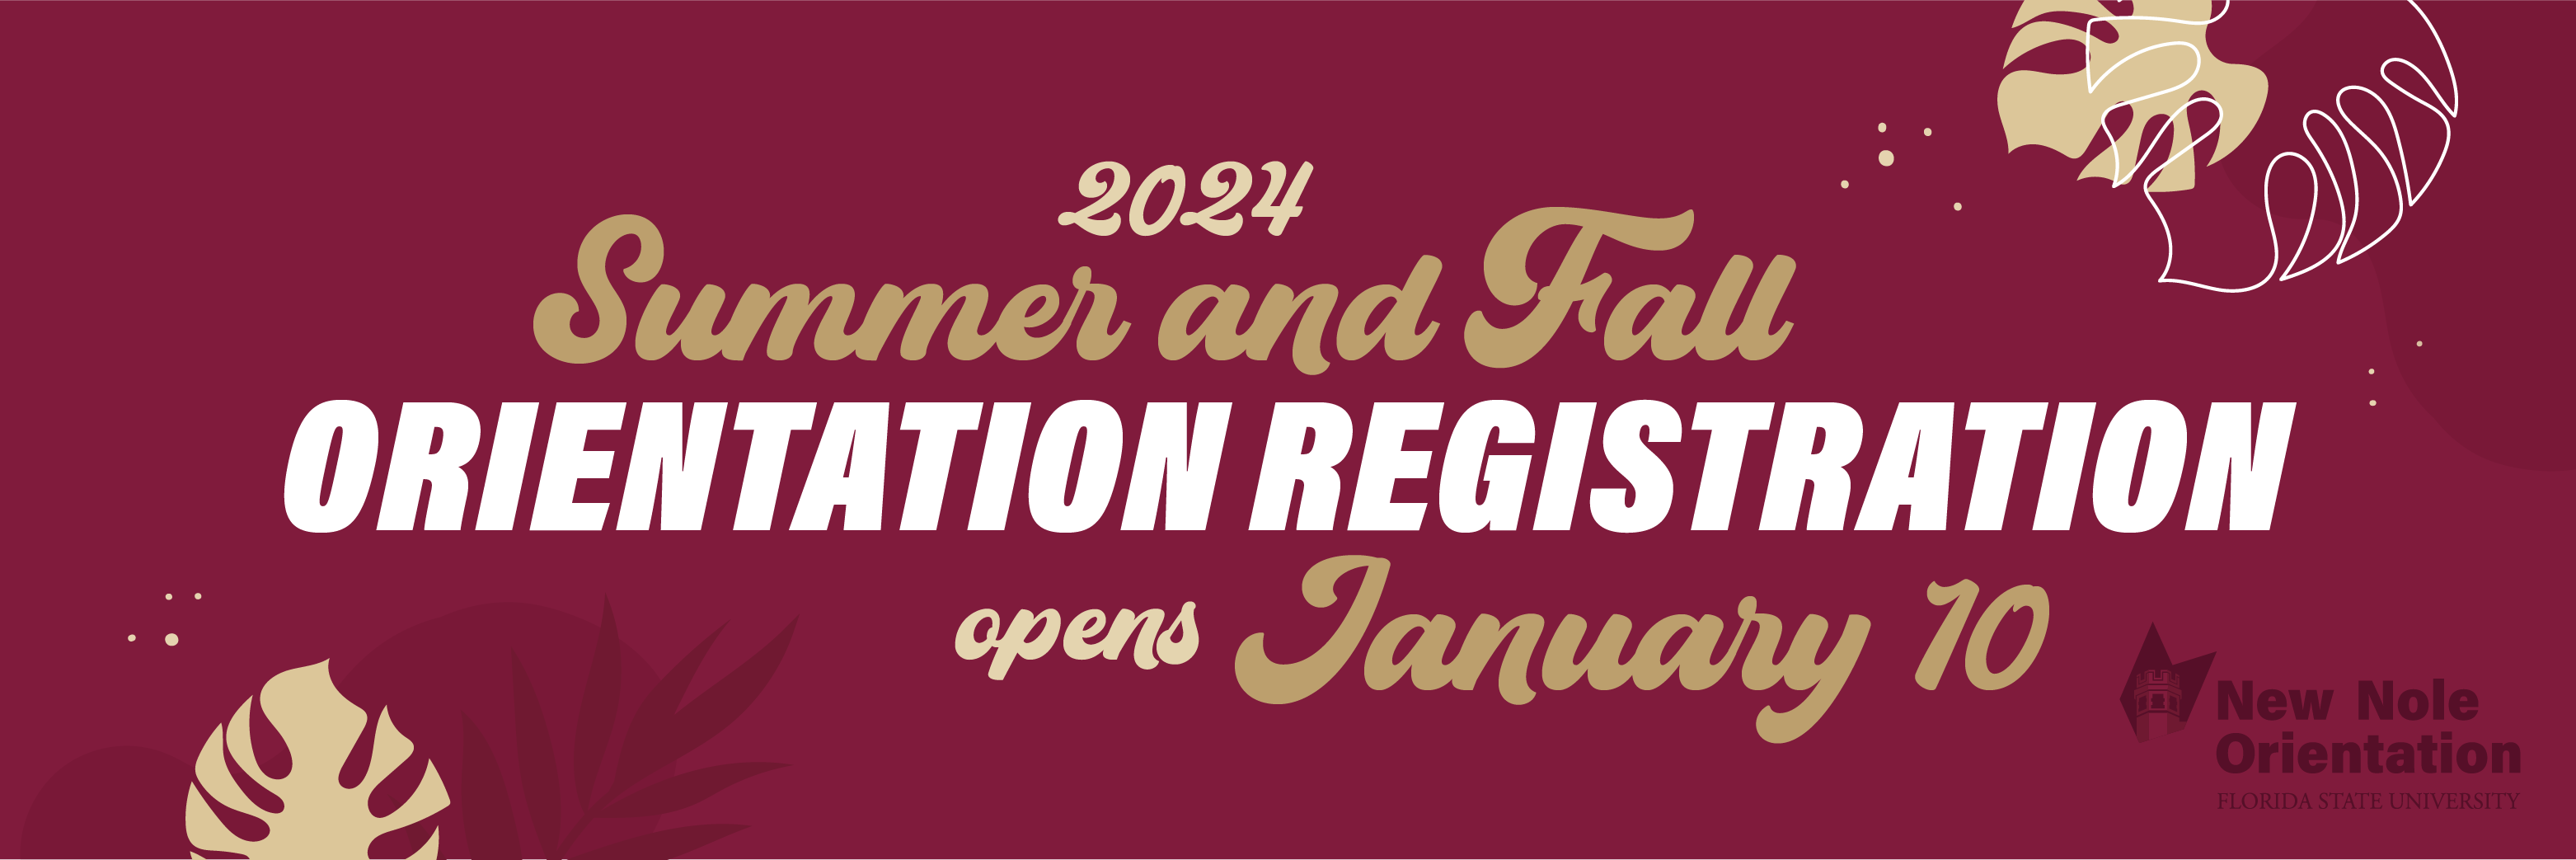 2024 Summer and Fall Orientation Registration opens January 10